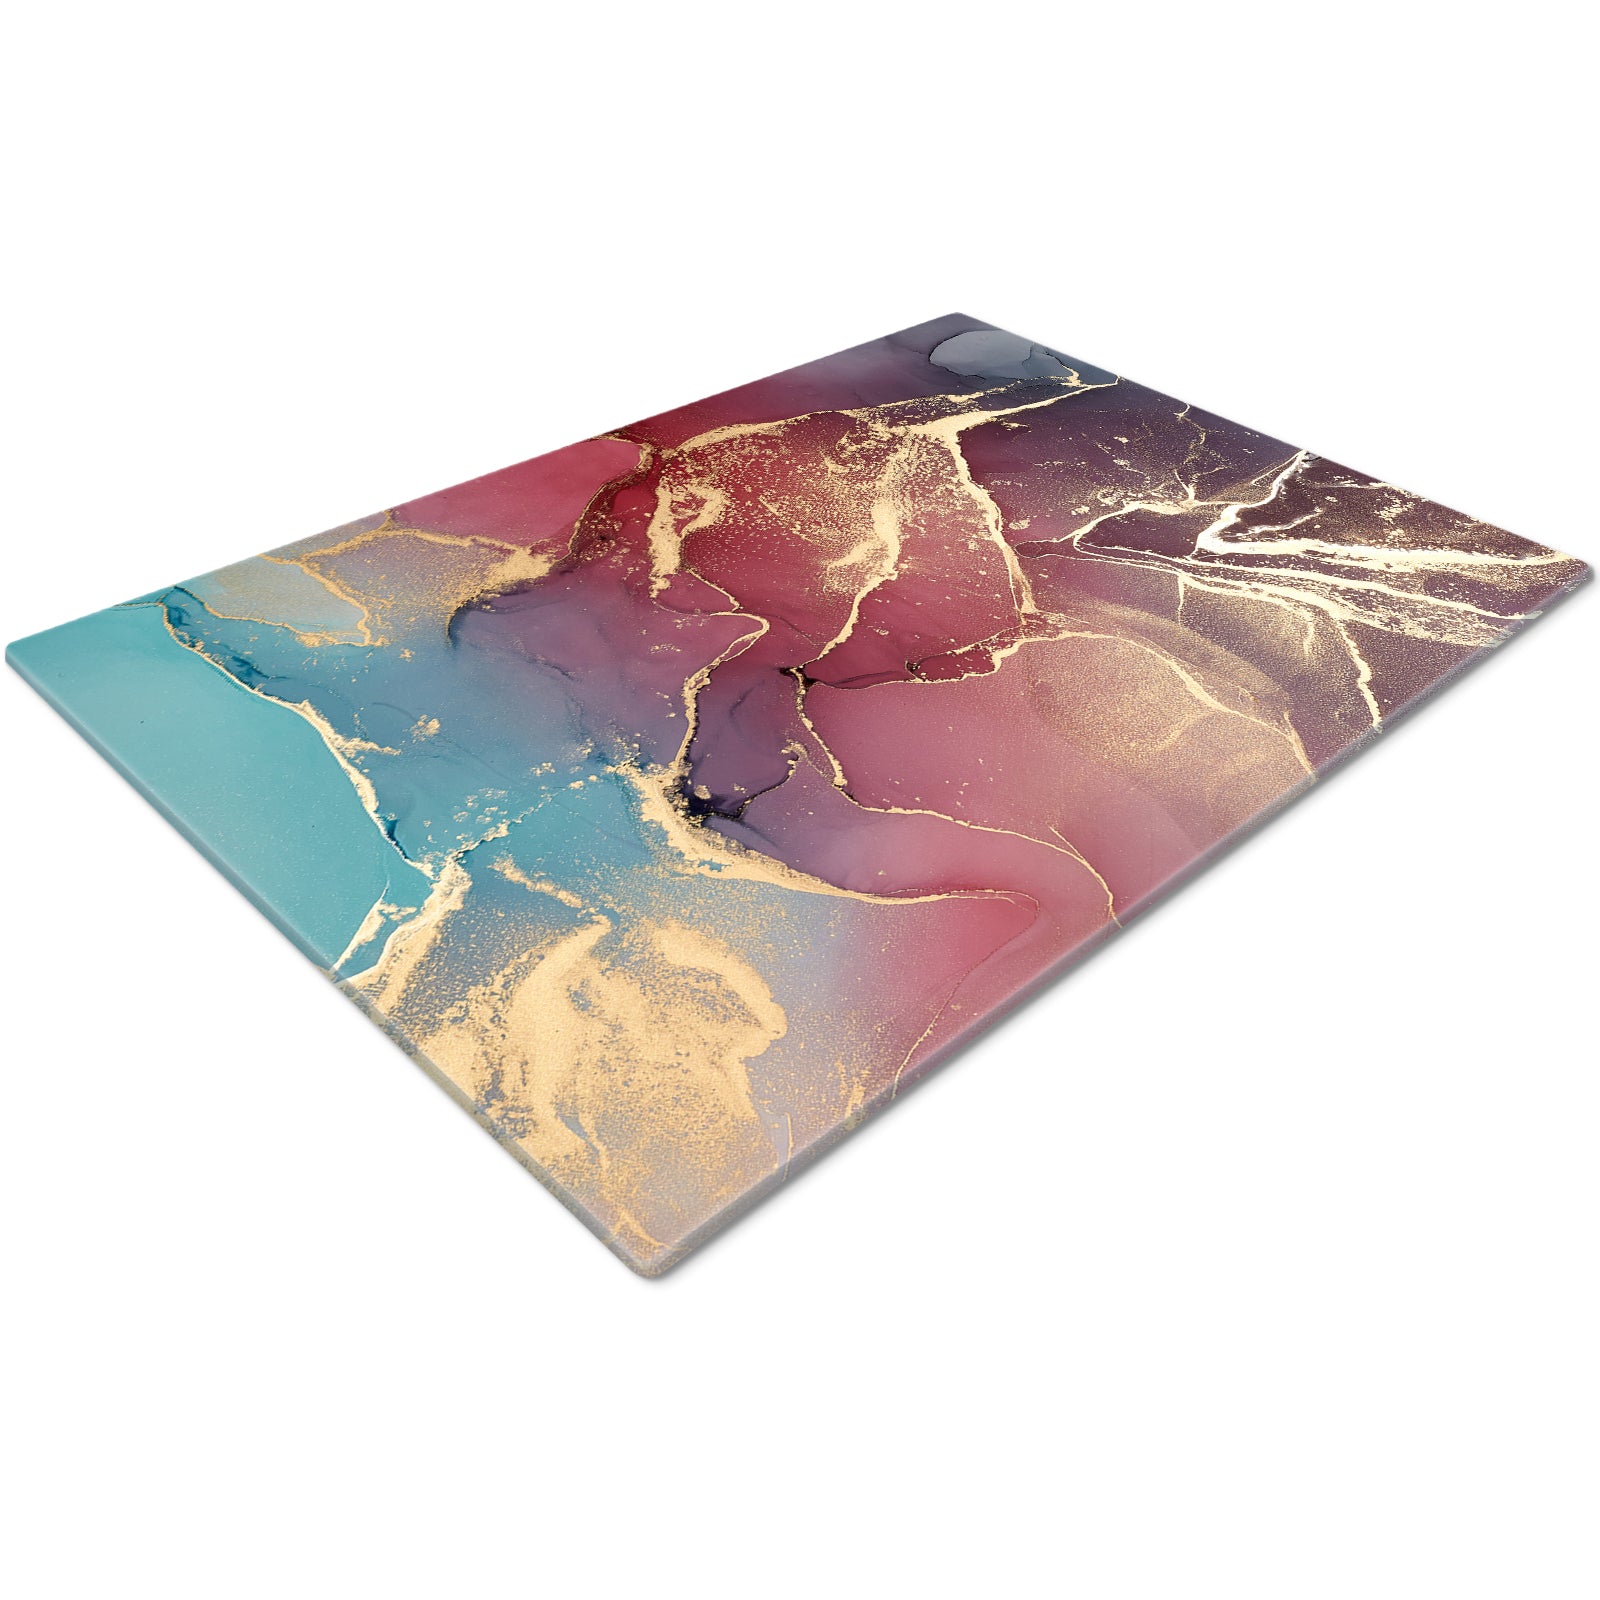 Glass Chopping Board For Kitchen 